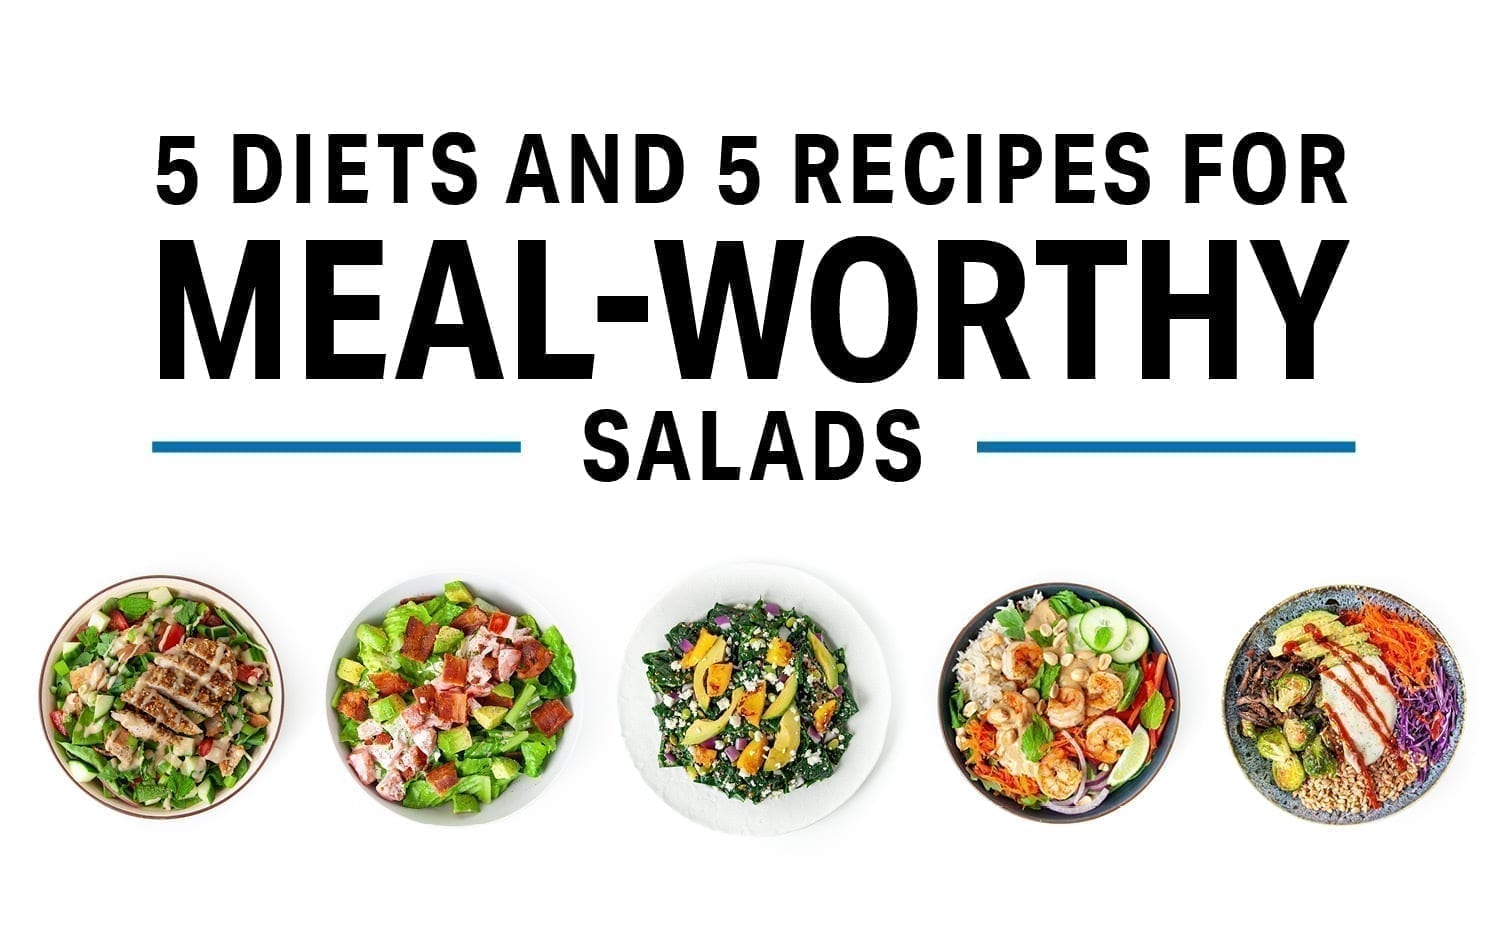 5 Diets and 5 Recipes For Meal-Worthy Salads